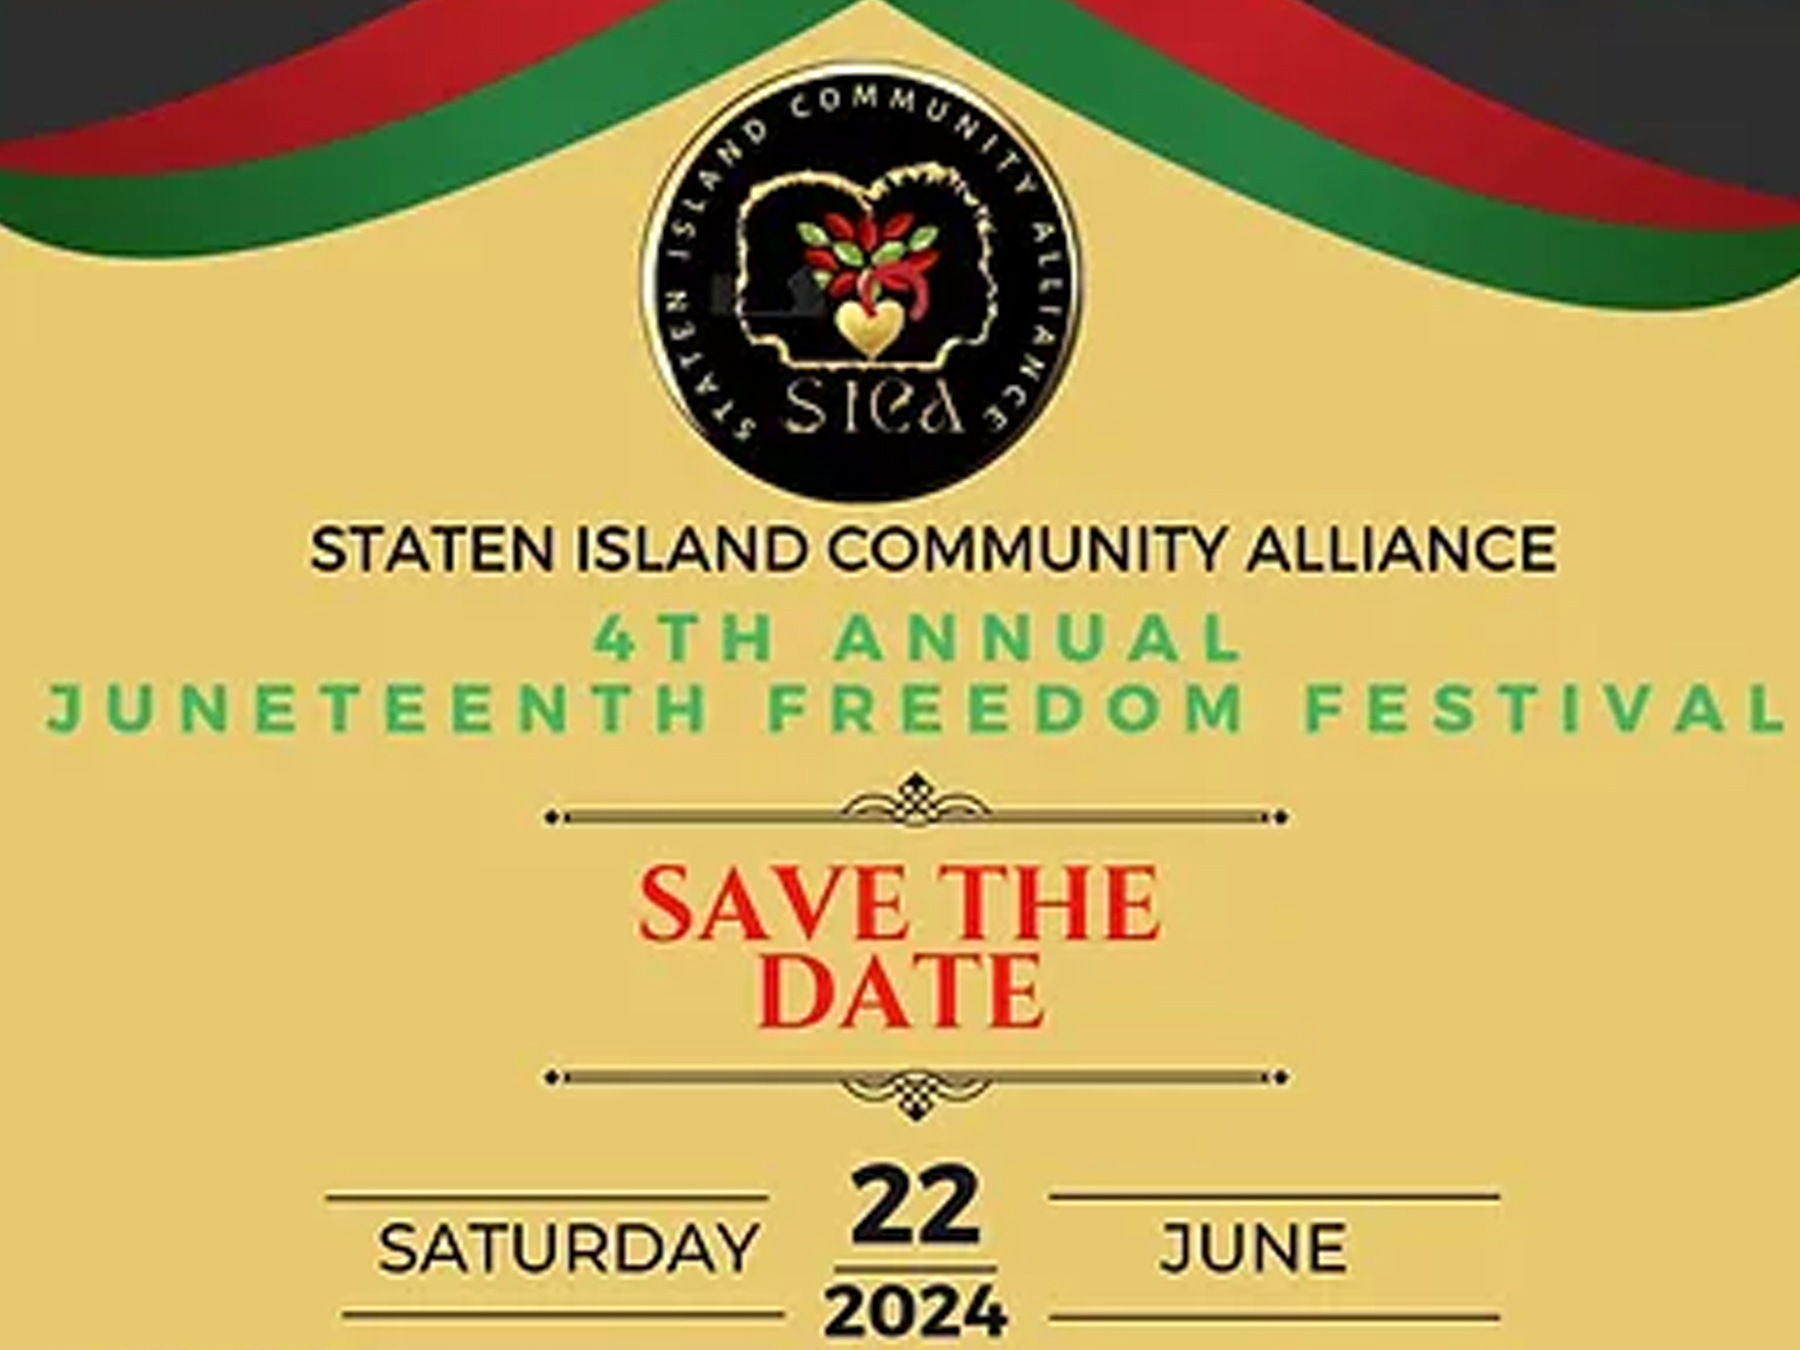 Staten Island Community Alliance 4th Annual Juneteenth Freedom Festival, Save the Date, June 22, 2024